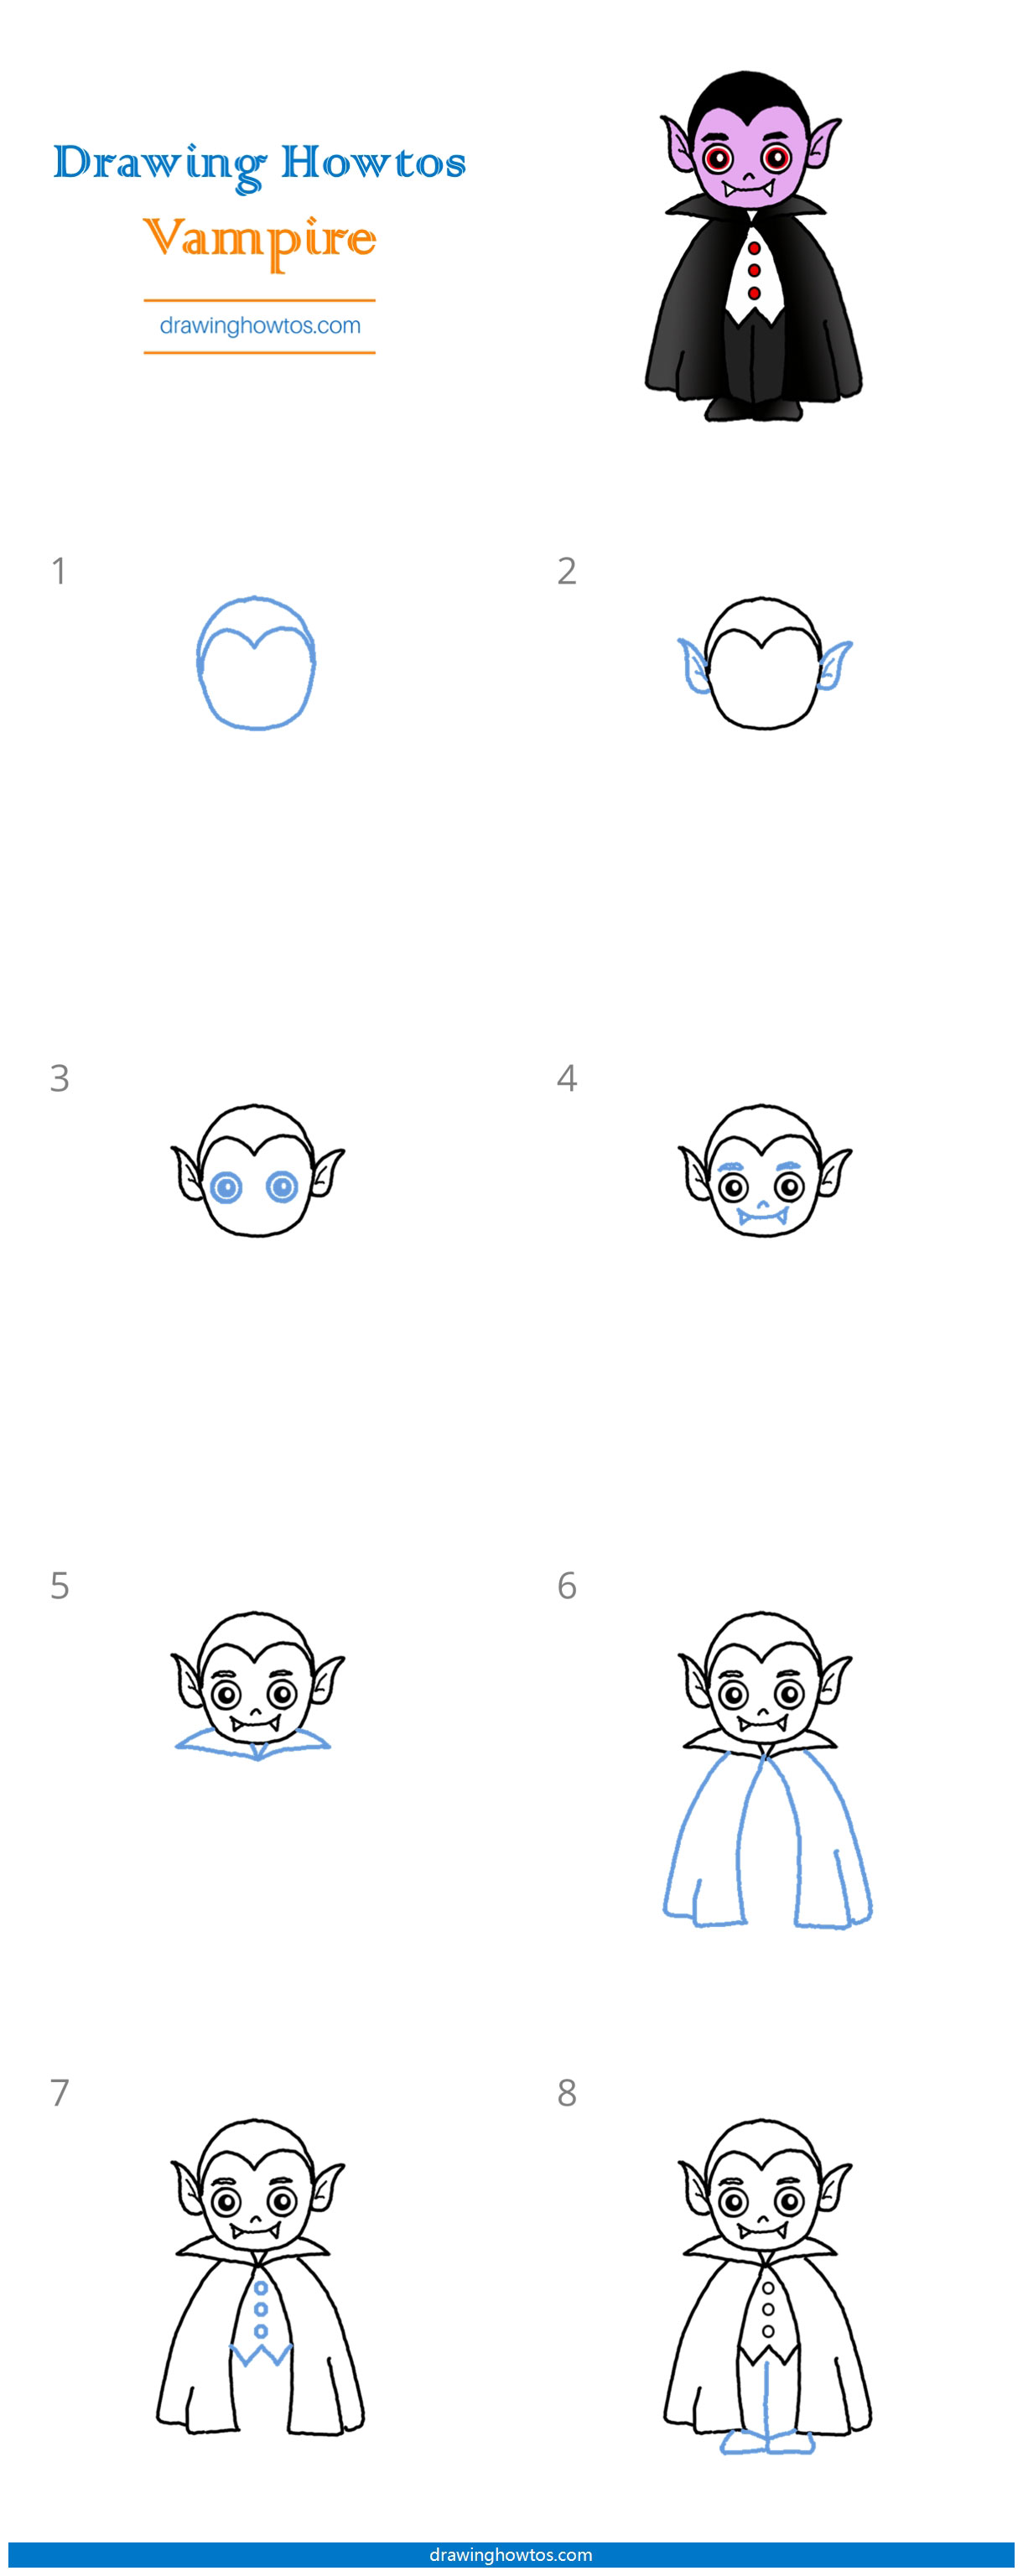 How to Draw a Vampire - Step by Step Easy Drawing Guides - Drawing Howtos